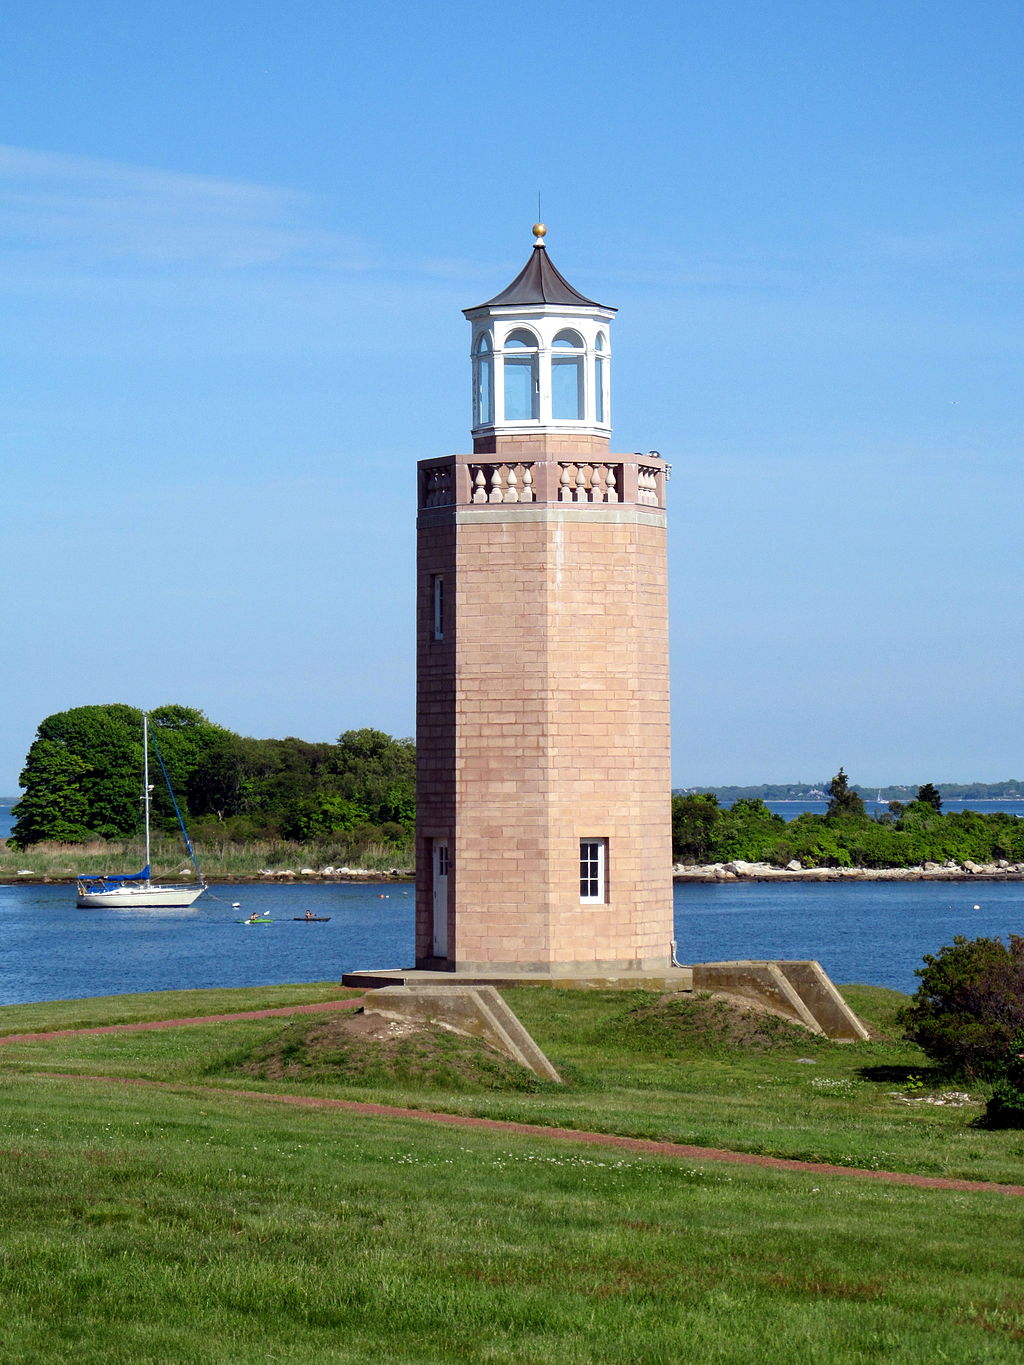 Avery Point Lighthouse was built in 1943 and is located just south of the mansion.